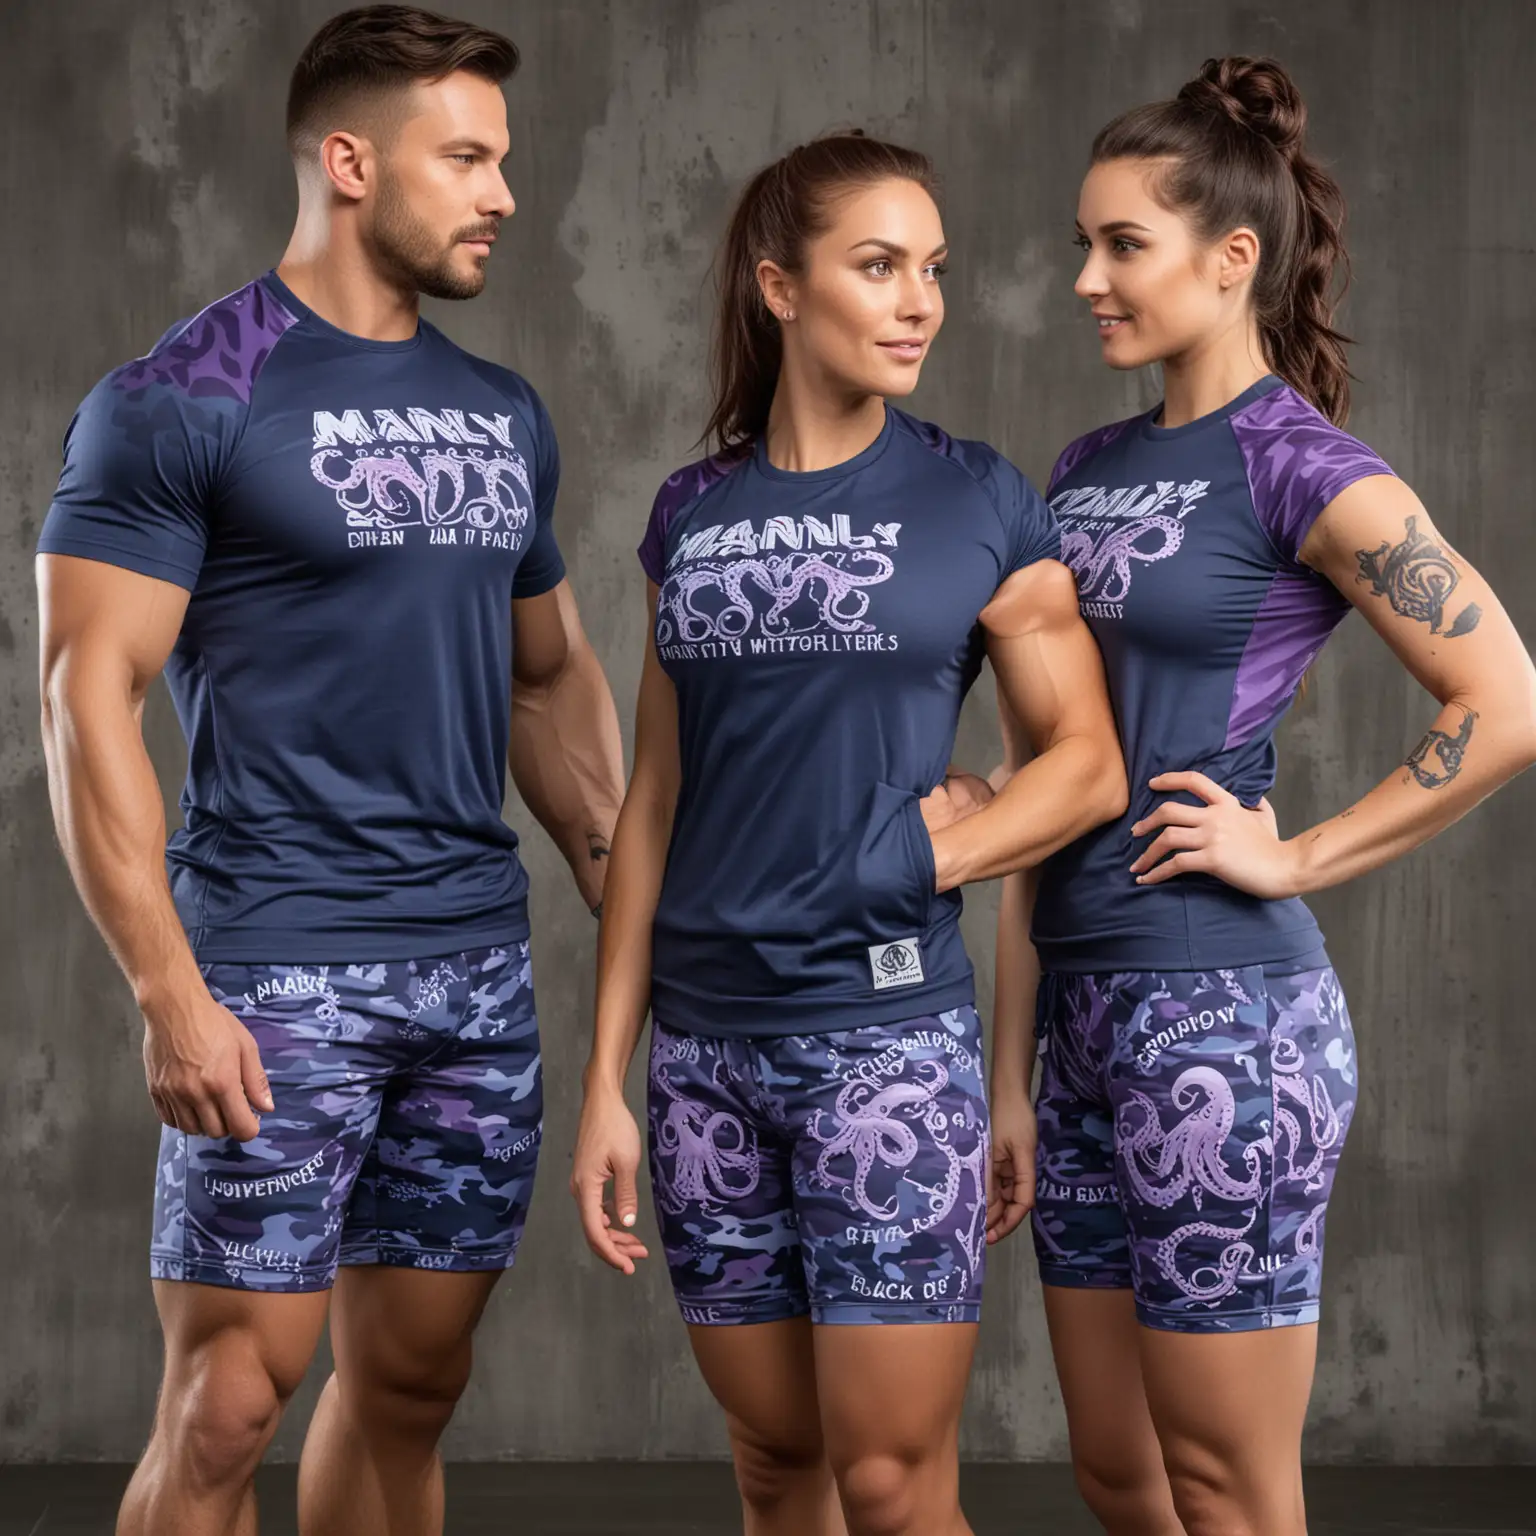 Manly Gym workout shirts and tops with matching shorts or joggers. With octopus logo, motivational phrase imprints in steel blue and violet blue camouflage color pattern worn by male and female body builders. 